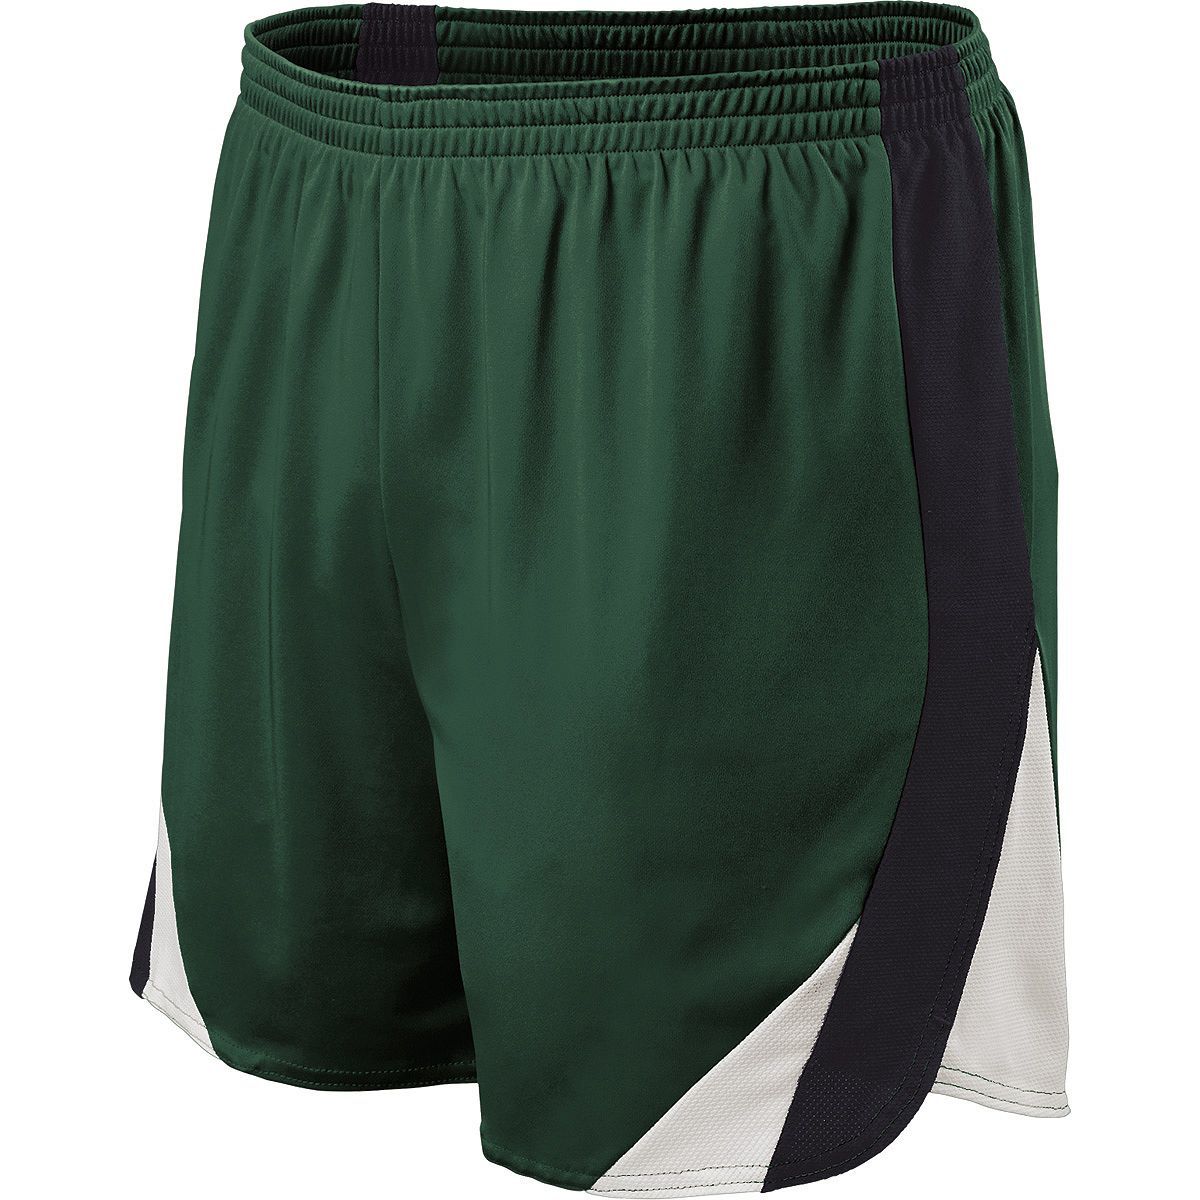 Holloway Approach Shorts in Forest/Black/White  -Part of the Adult, Adult-Shorts, Track-Field, Holloway product lines at KanaleyCreations.com